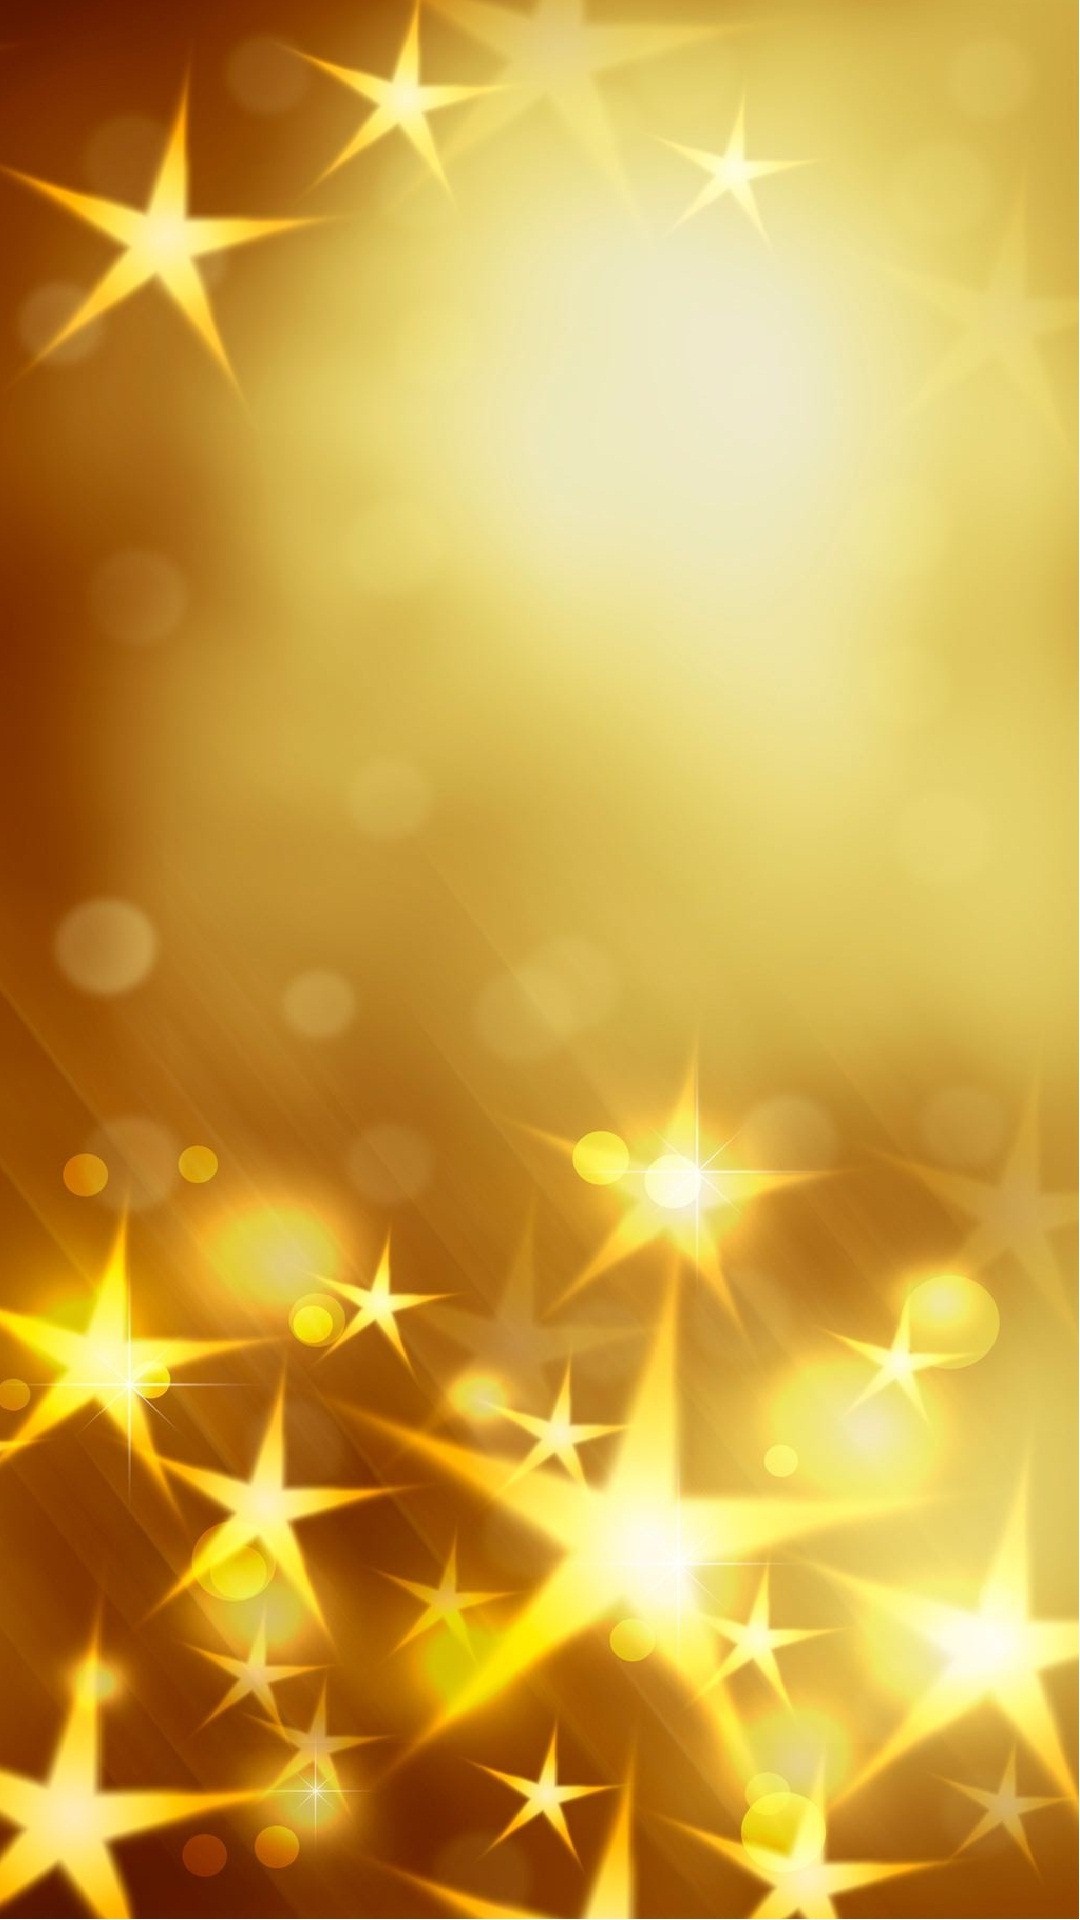 Gold Sparkle Android Wallpaper High Resolution 1080X1920